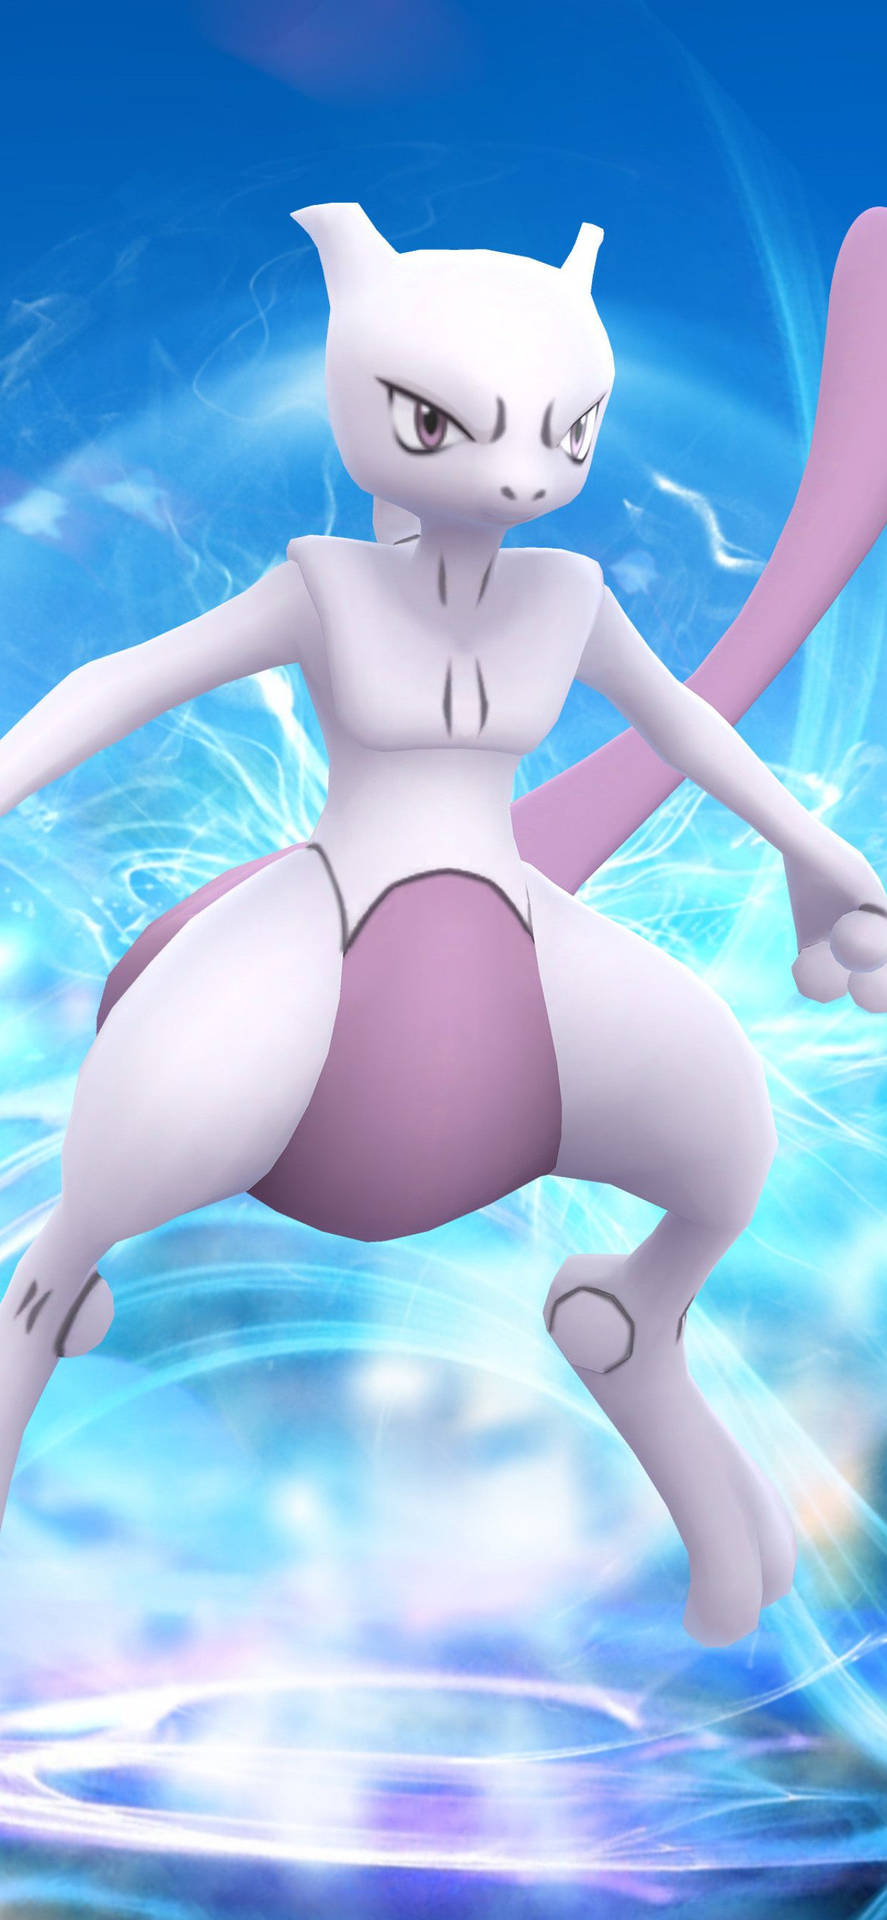 Mewtwo In Game Phone